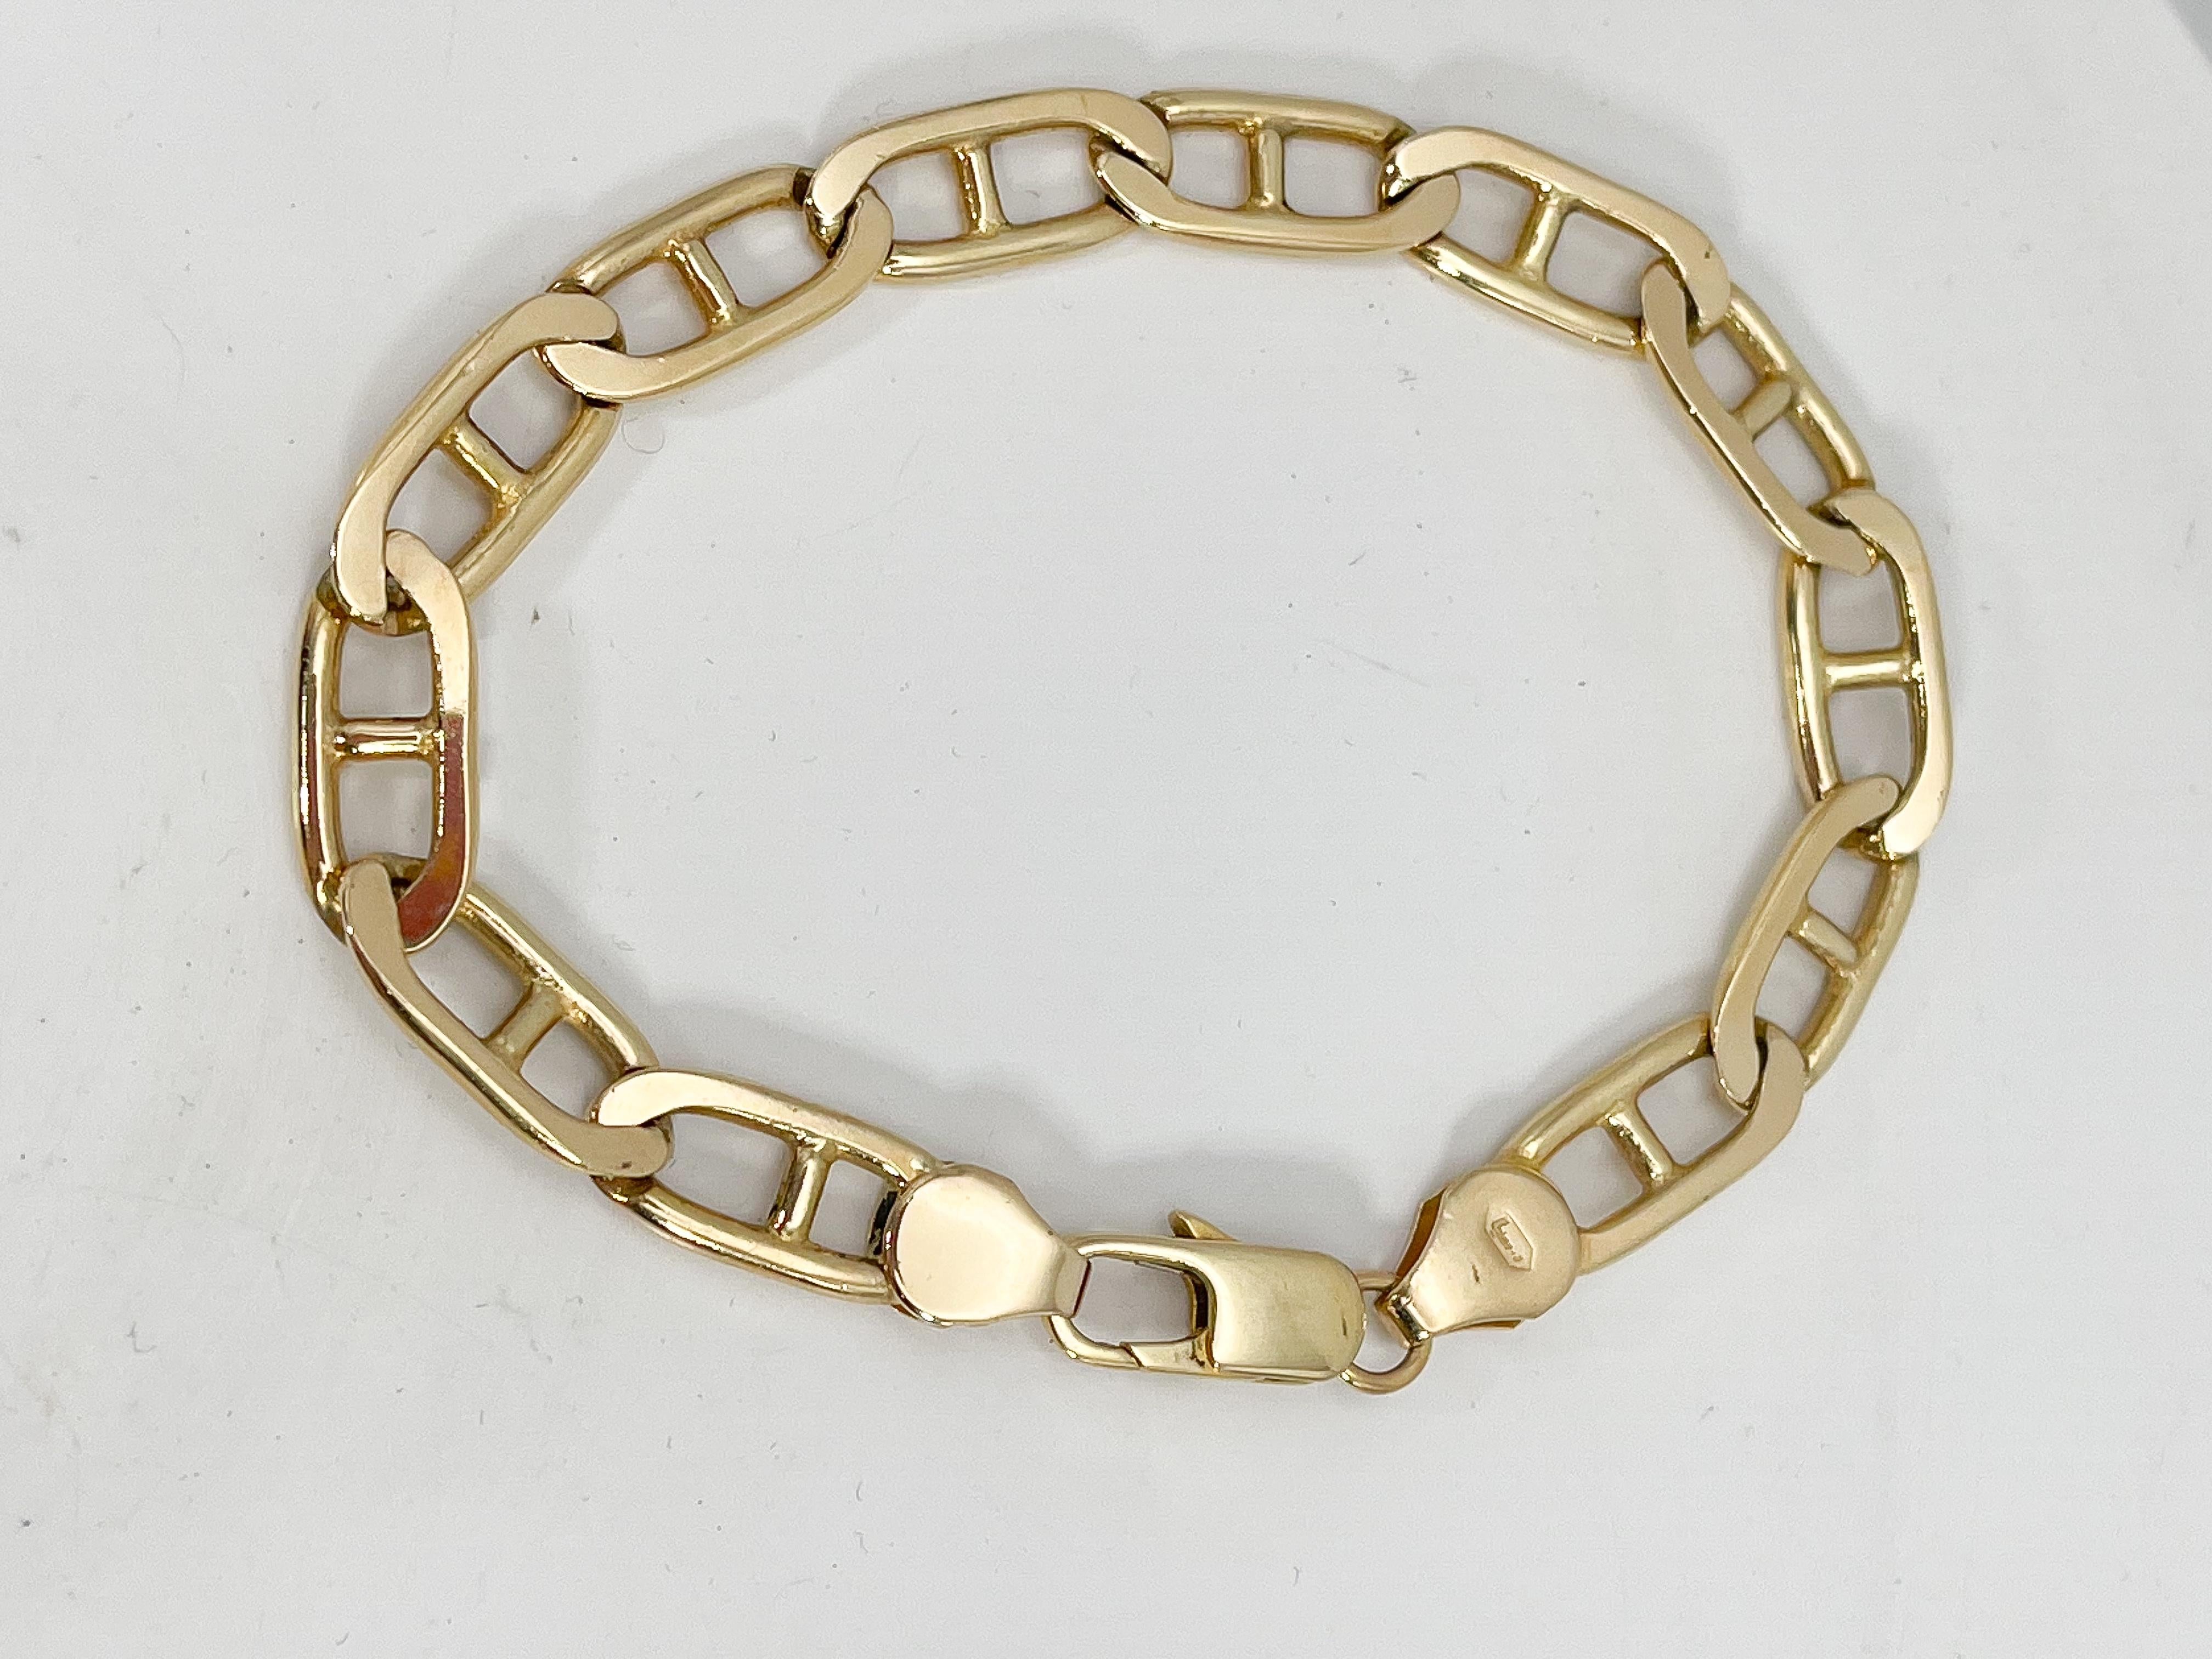 14k yellow gold men's anchor link bracelet. This bracelet has a length of 7 1/2 inches, the width is 7.5 mm, has a lobster clasp to open and close, and it has a total weight of 18.9 grams.